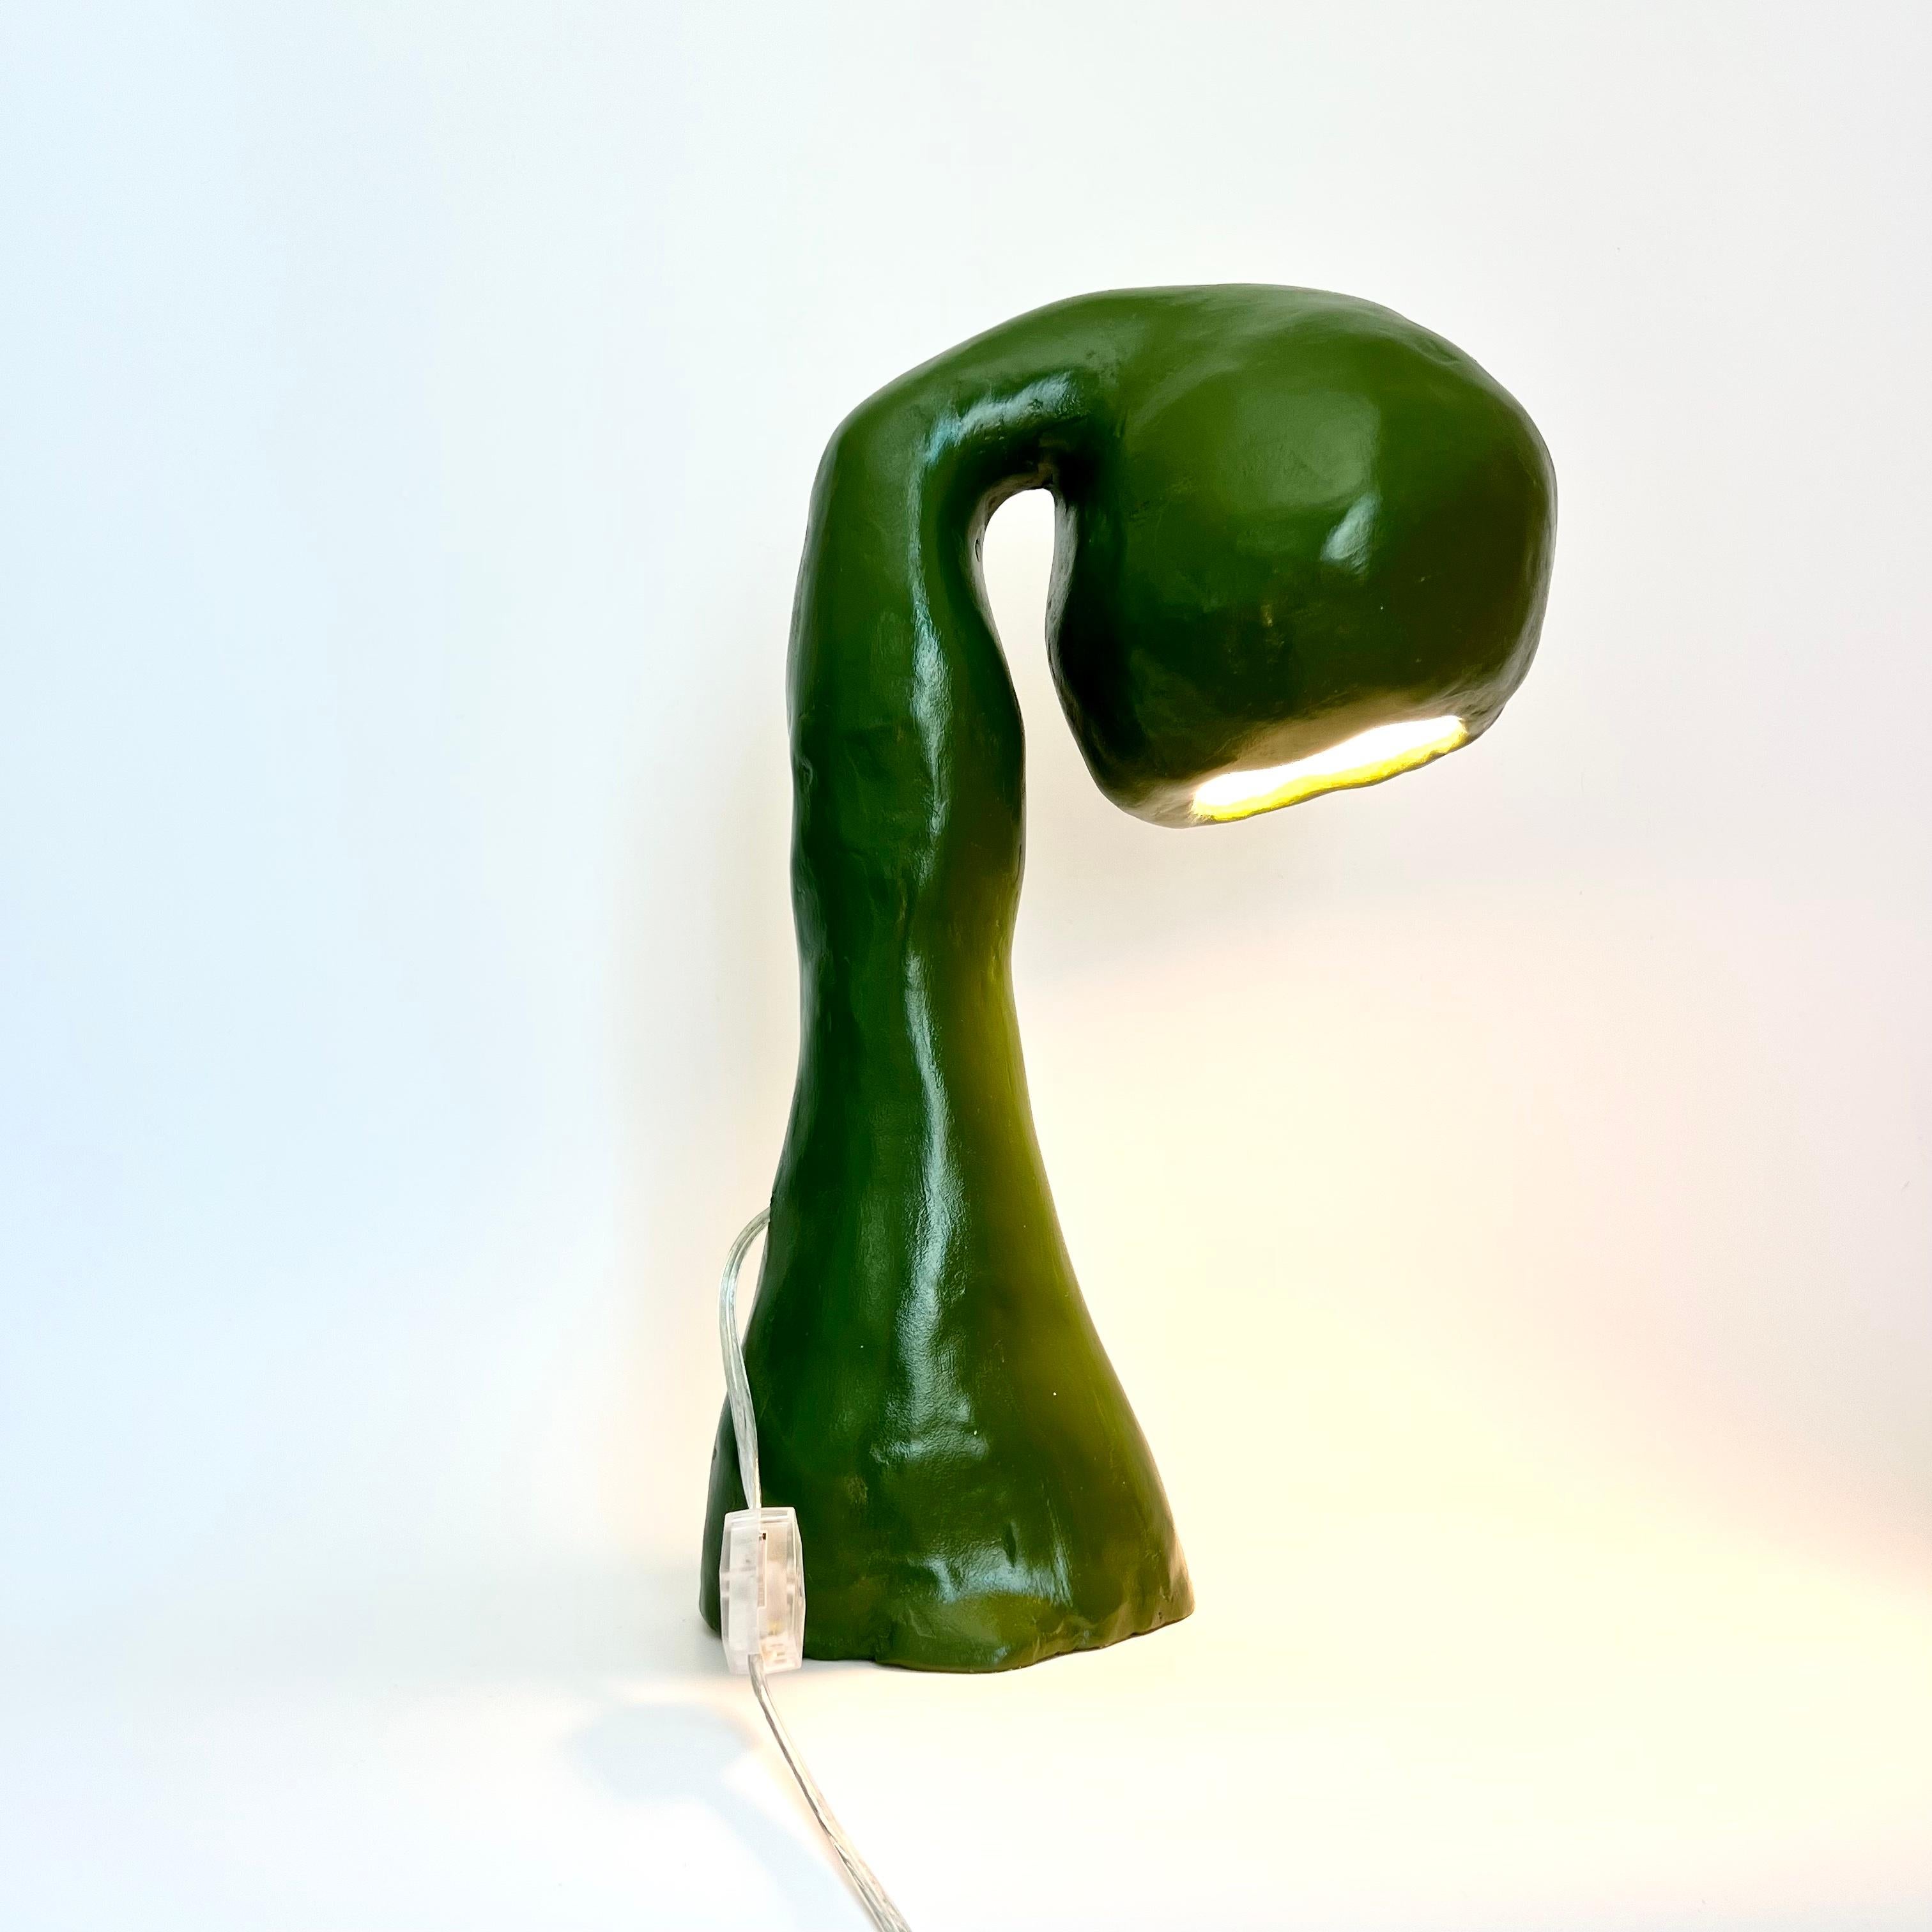 Hestian Light Series by Studio Chora, Table Lamp, Green Resin, Made-To-Order For Sale 2